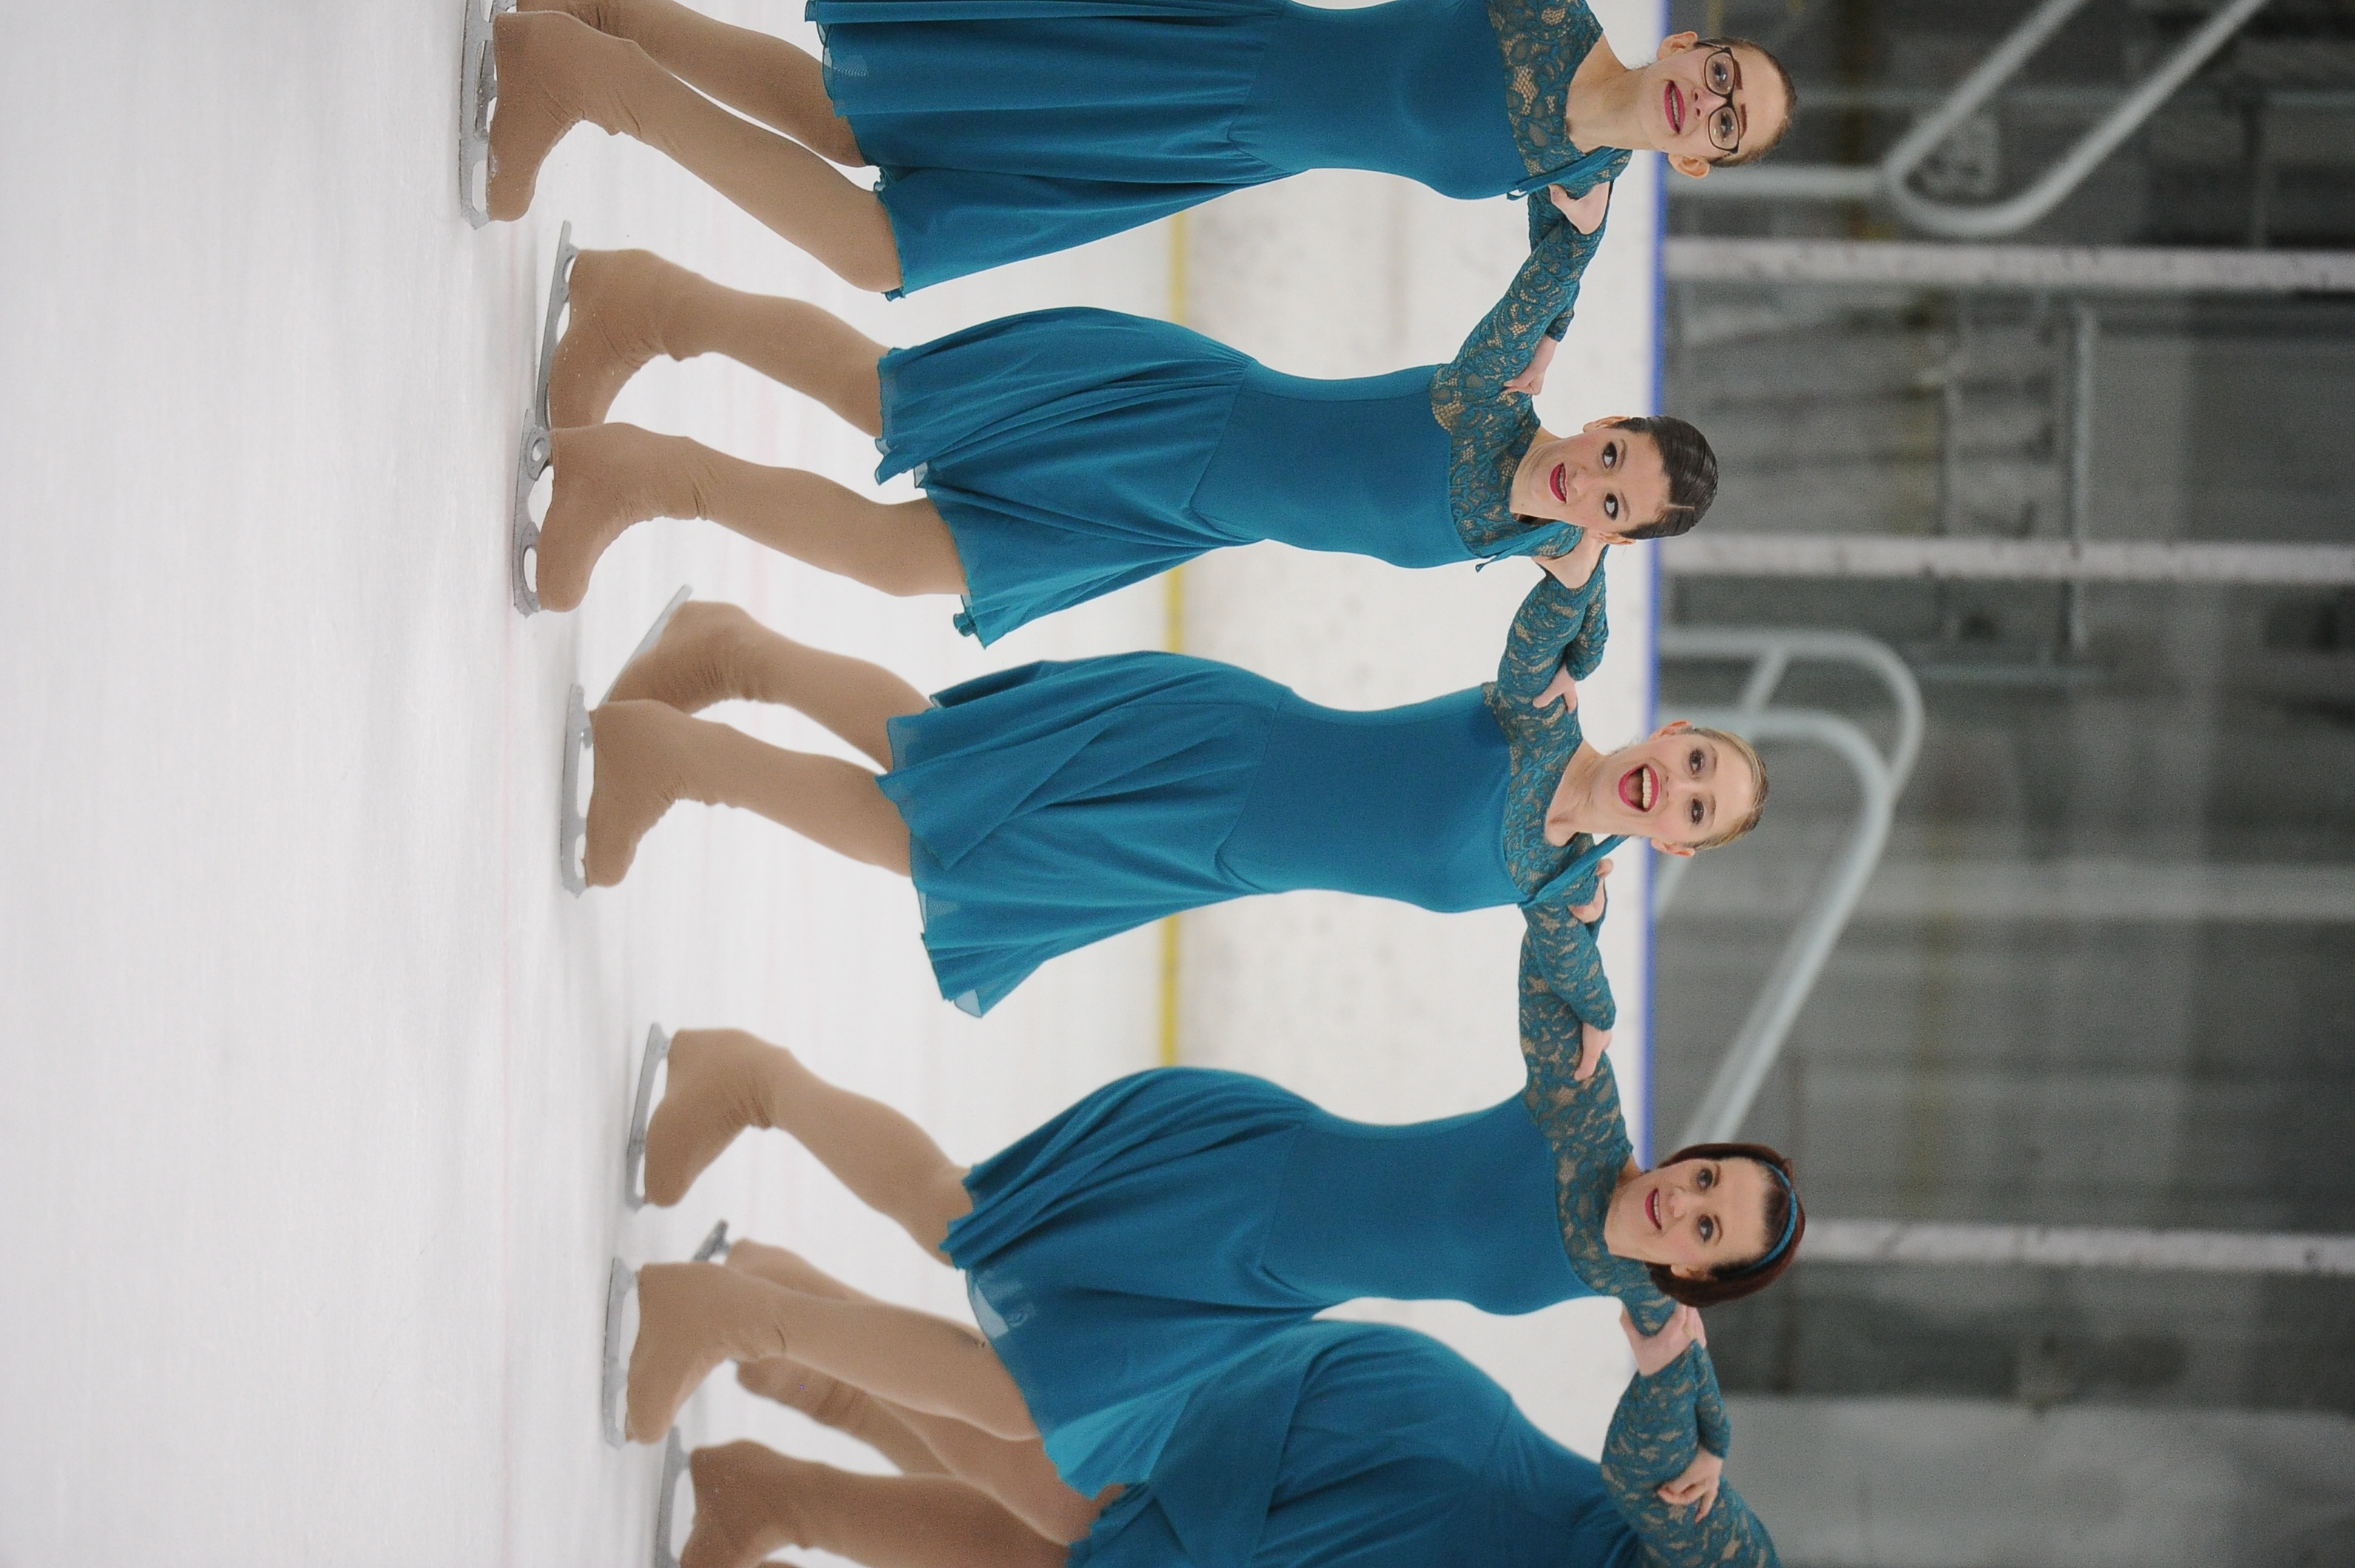 Synchronized skaters in a line